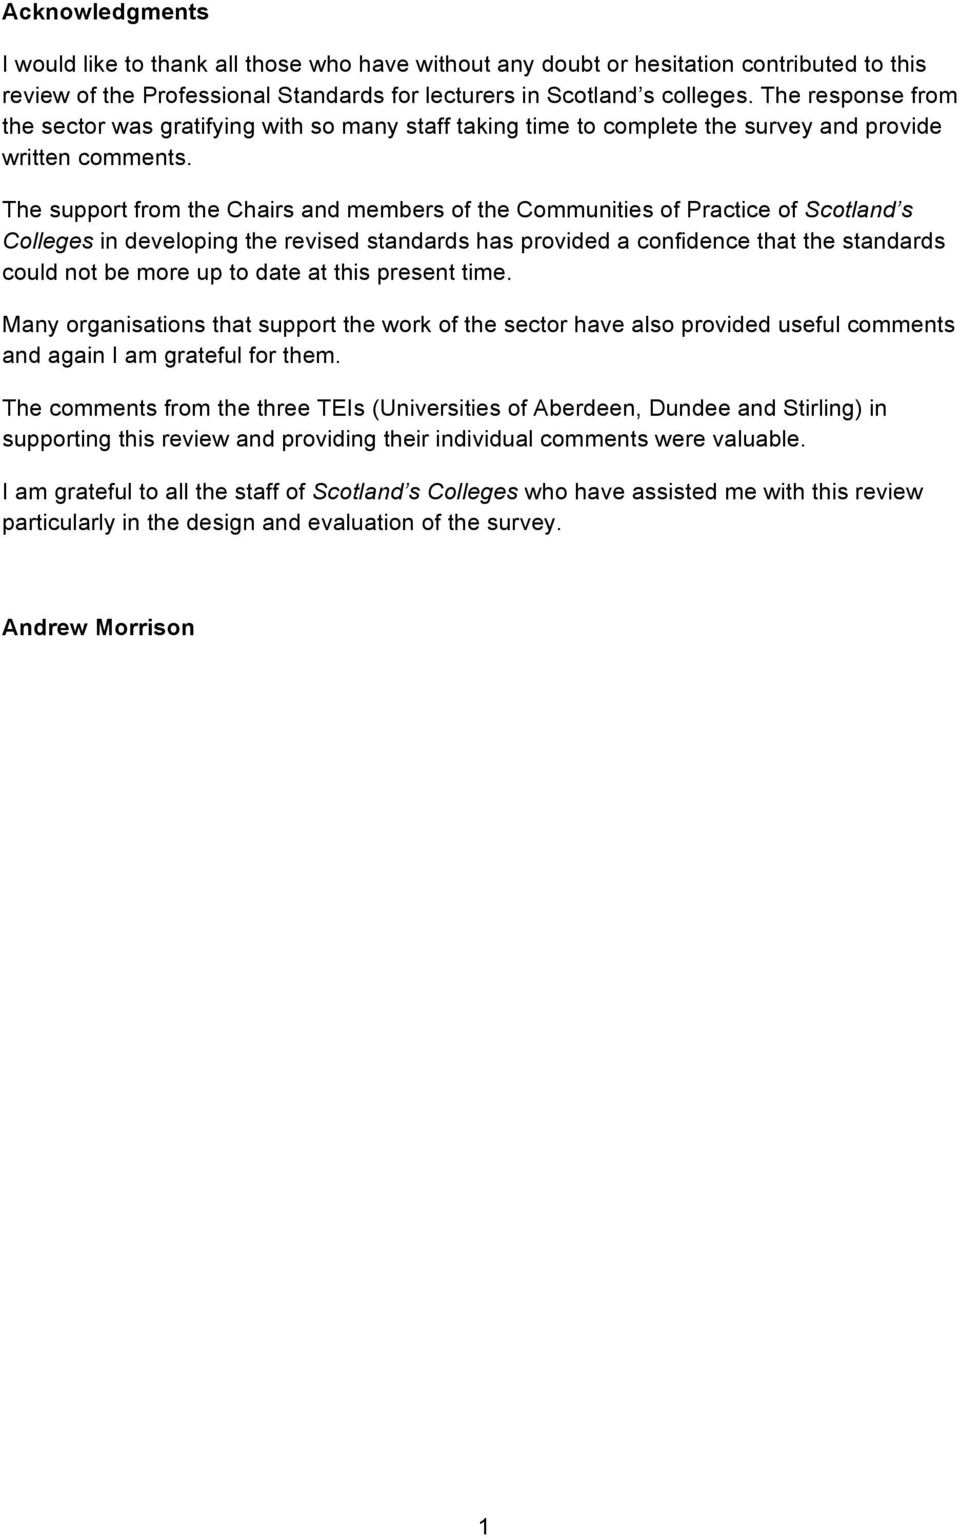 The support from the Chairs and members of the Communities of Practice of Scotland s Colleges in developing the revised standards has provided a confidence that the standards could not be more up to